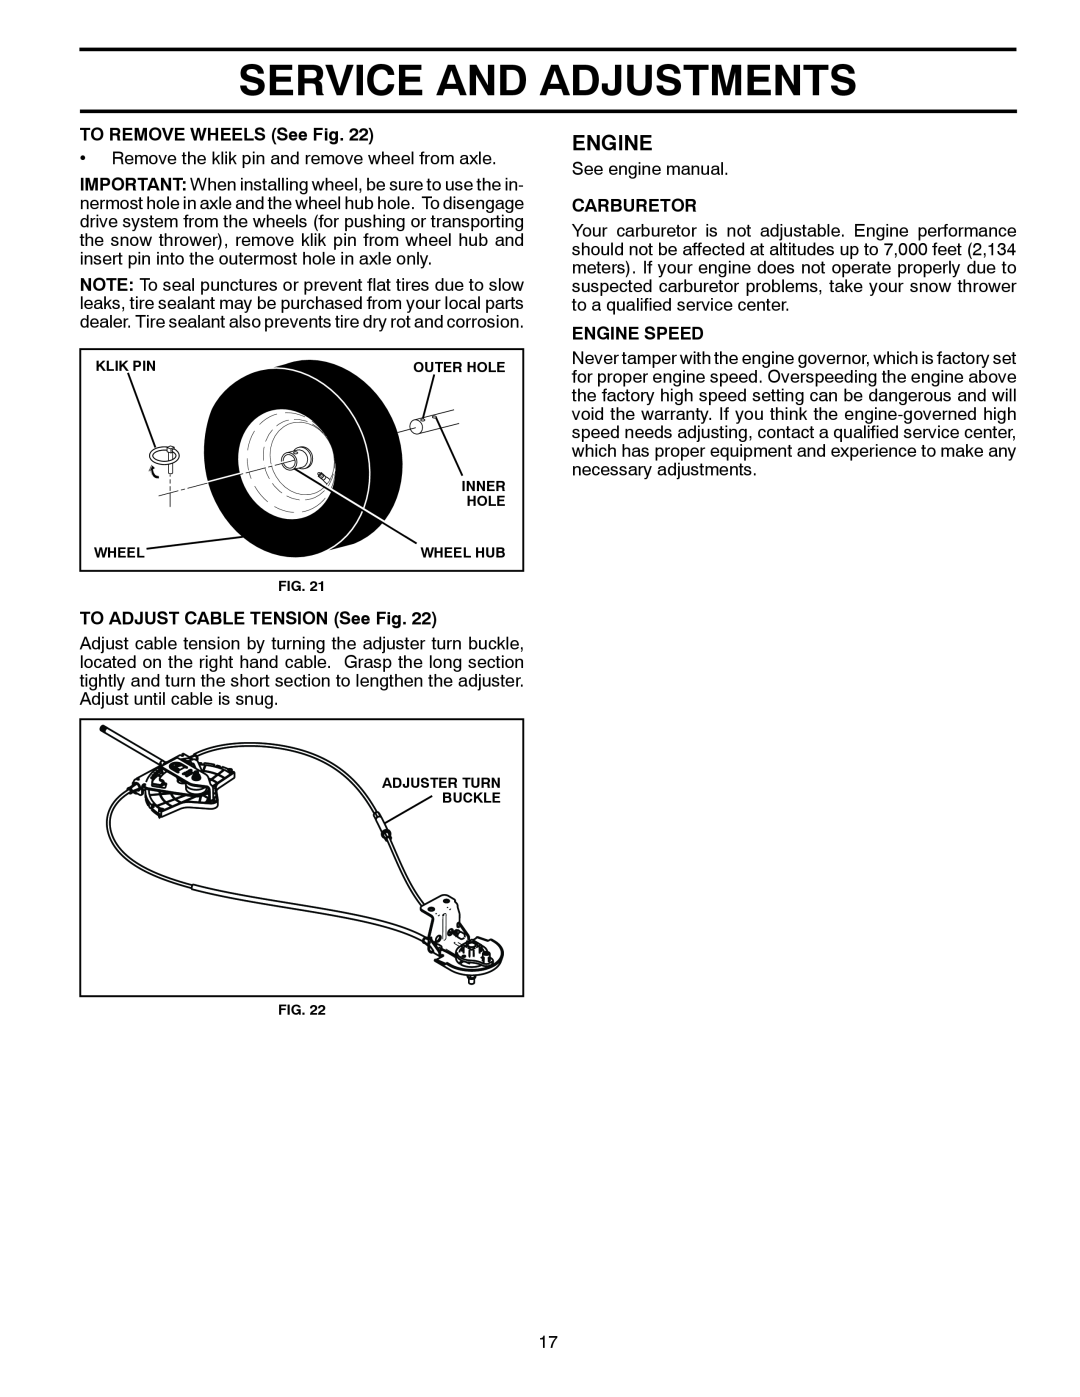 Poulan XT824ES Service And Adjustments, Engine, TO REMOVE WHEELS See Fig, TO ADJUST CABLE TENSION See Fig, Carburetor 